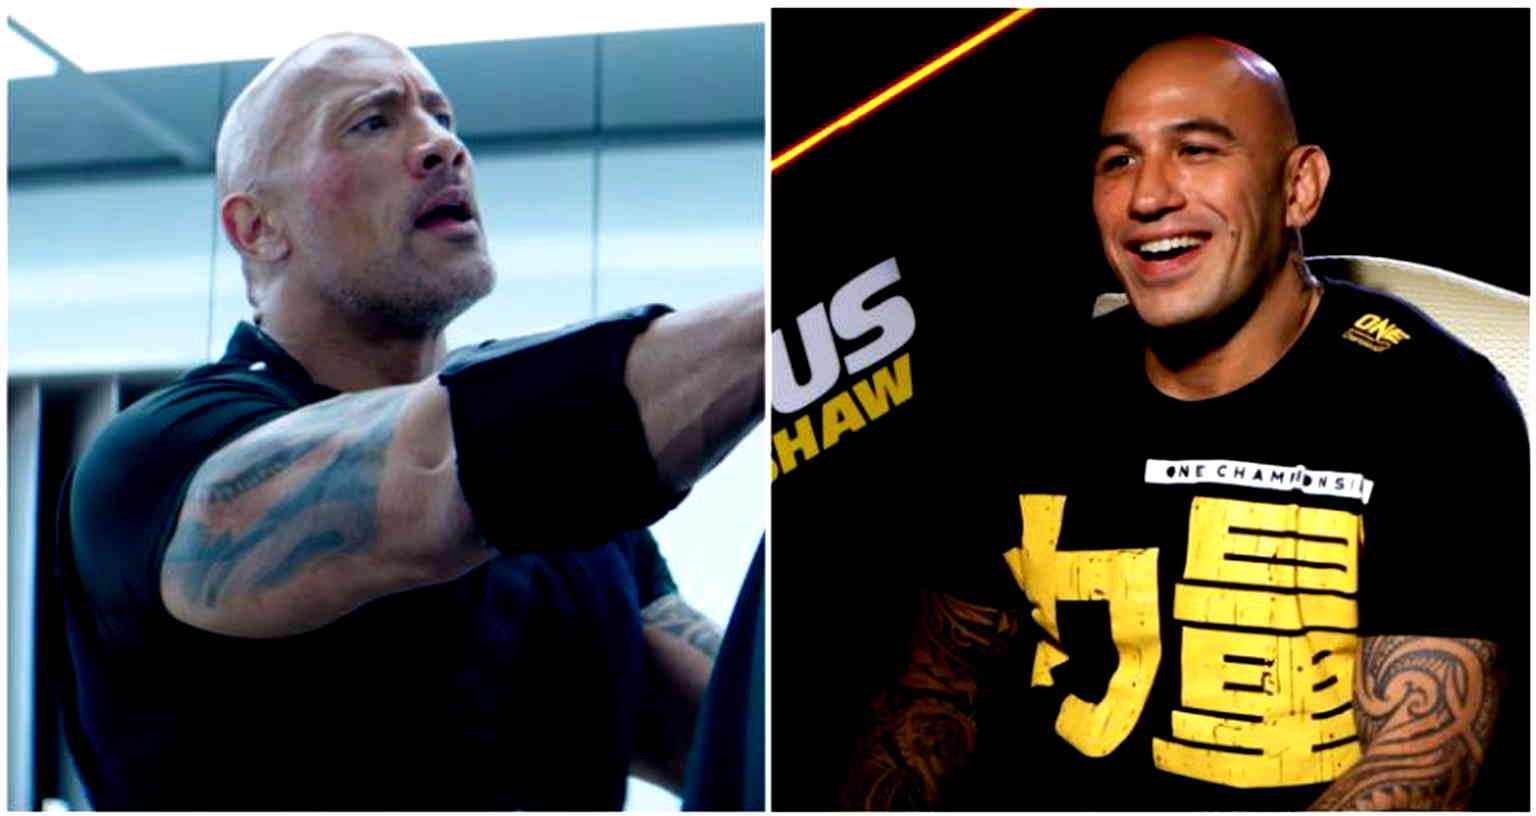 MMA Champ Brandon Vera Met With The Rock to Talk About Fighting in New ‘Fast and Furious’ Film